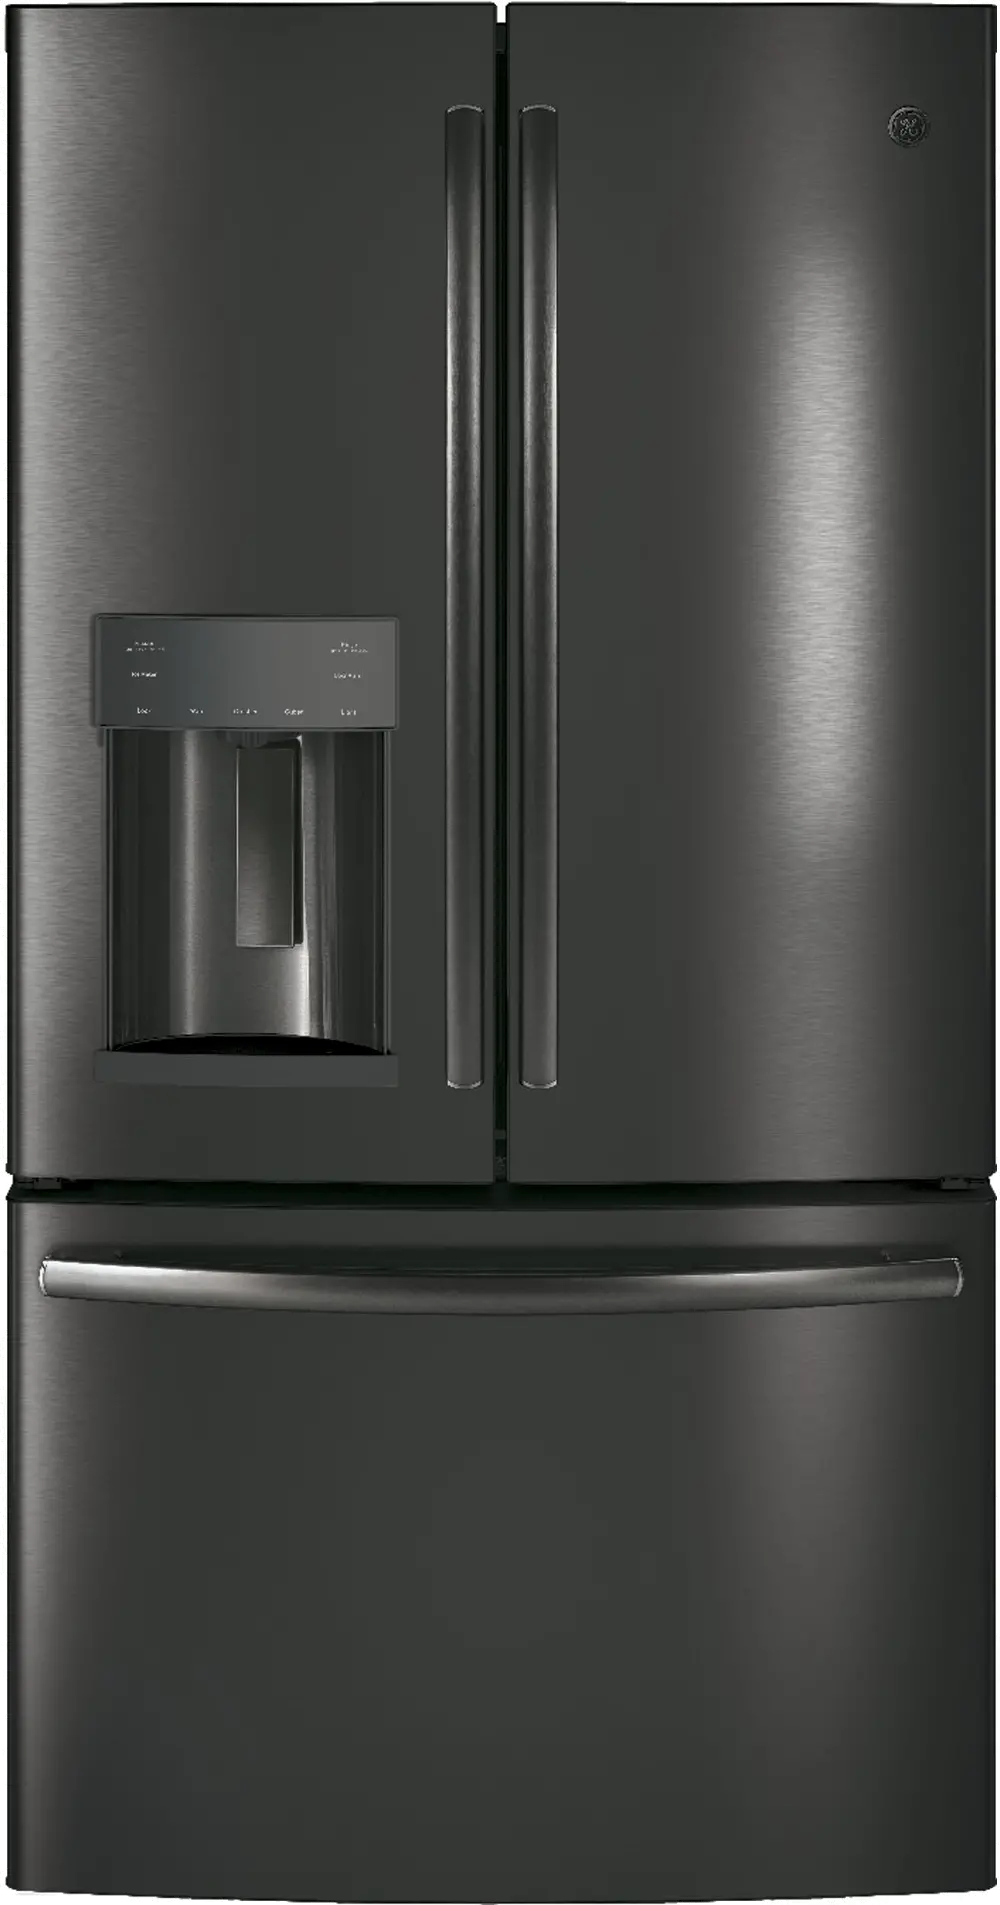 GFD28GBLTS GE 27.8 cu. ft. French Door Refrigerator - 36 Inch Black Stainless Steel-1